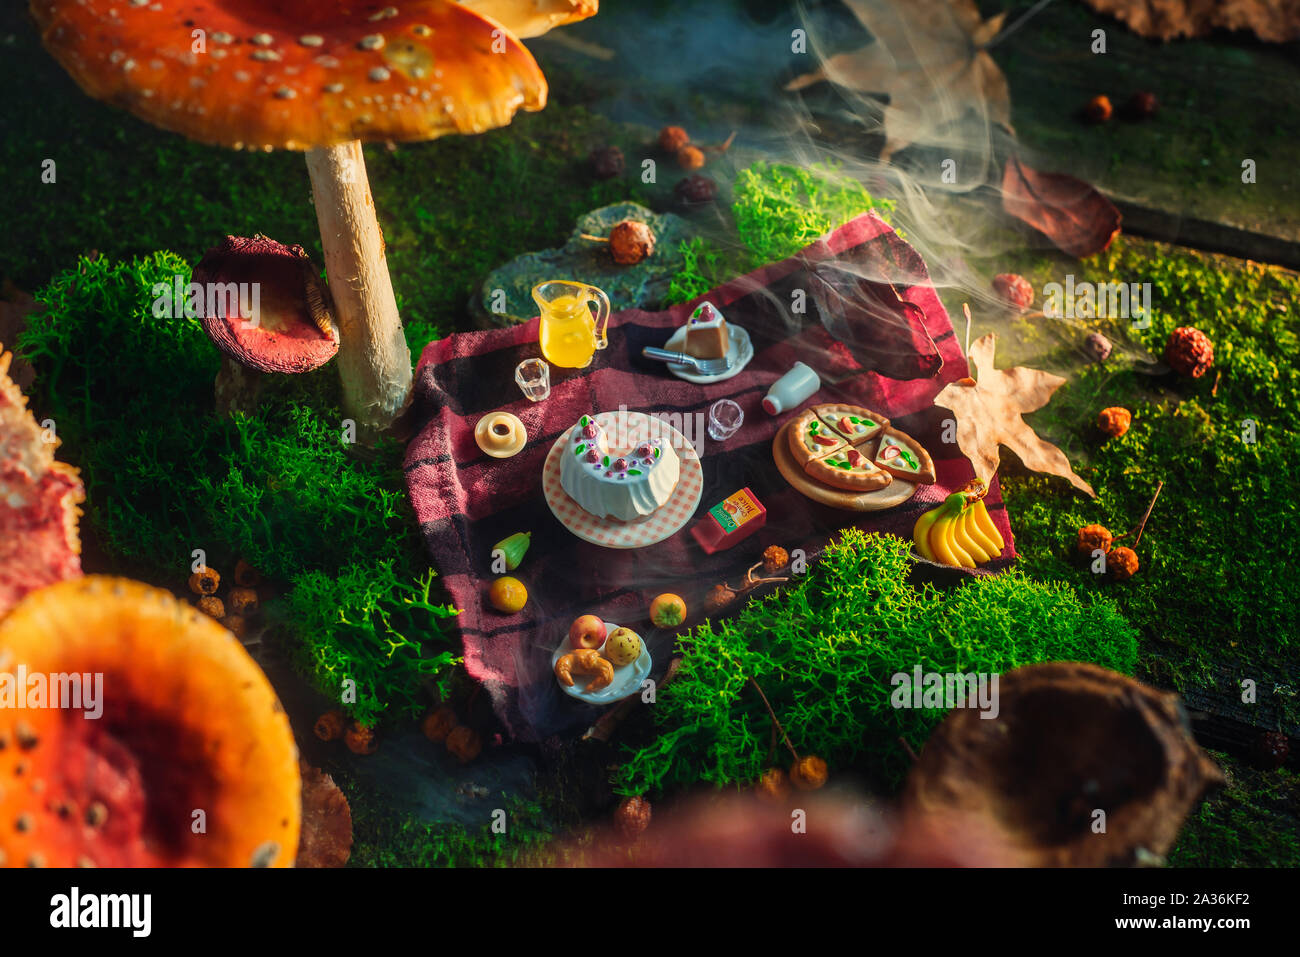 Picnic under toadstool mushroom, miniature food in the forest, tiny world concept. Magical art photo header. Stock Photo